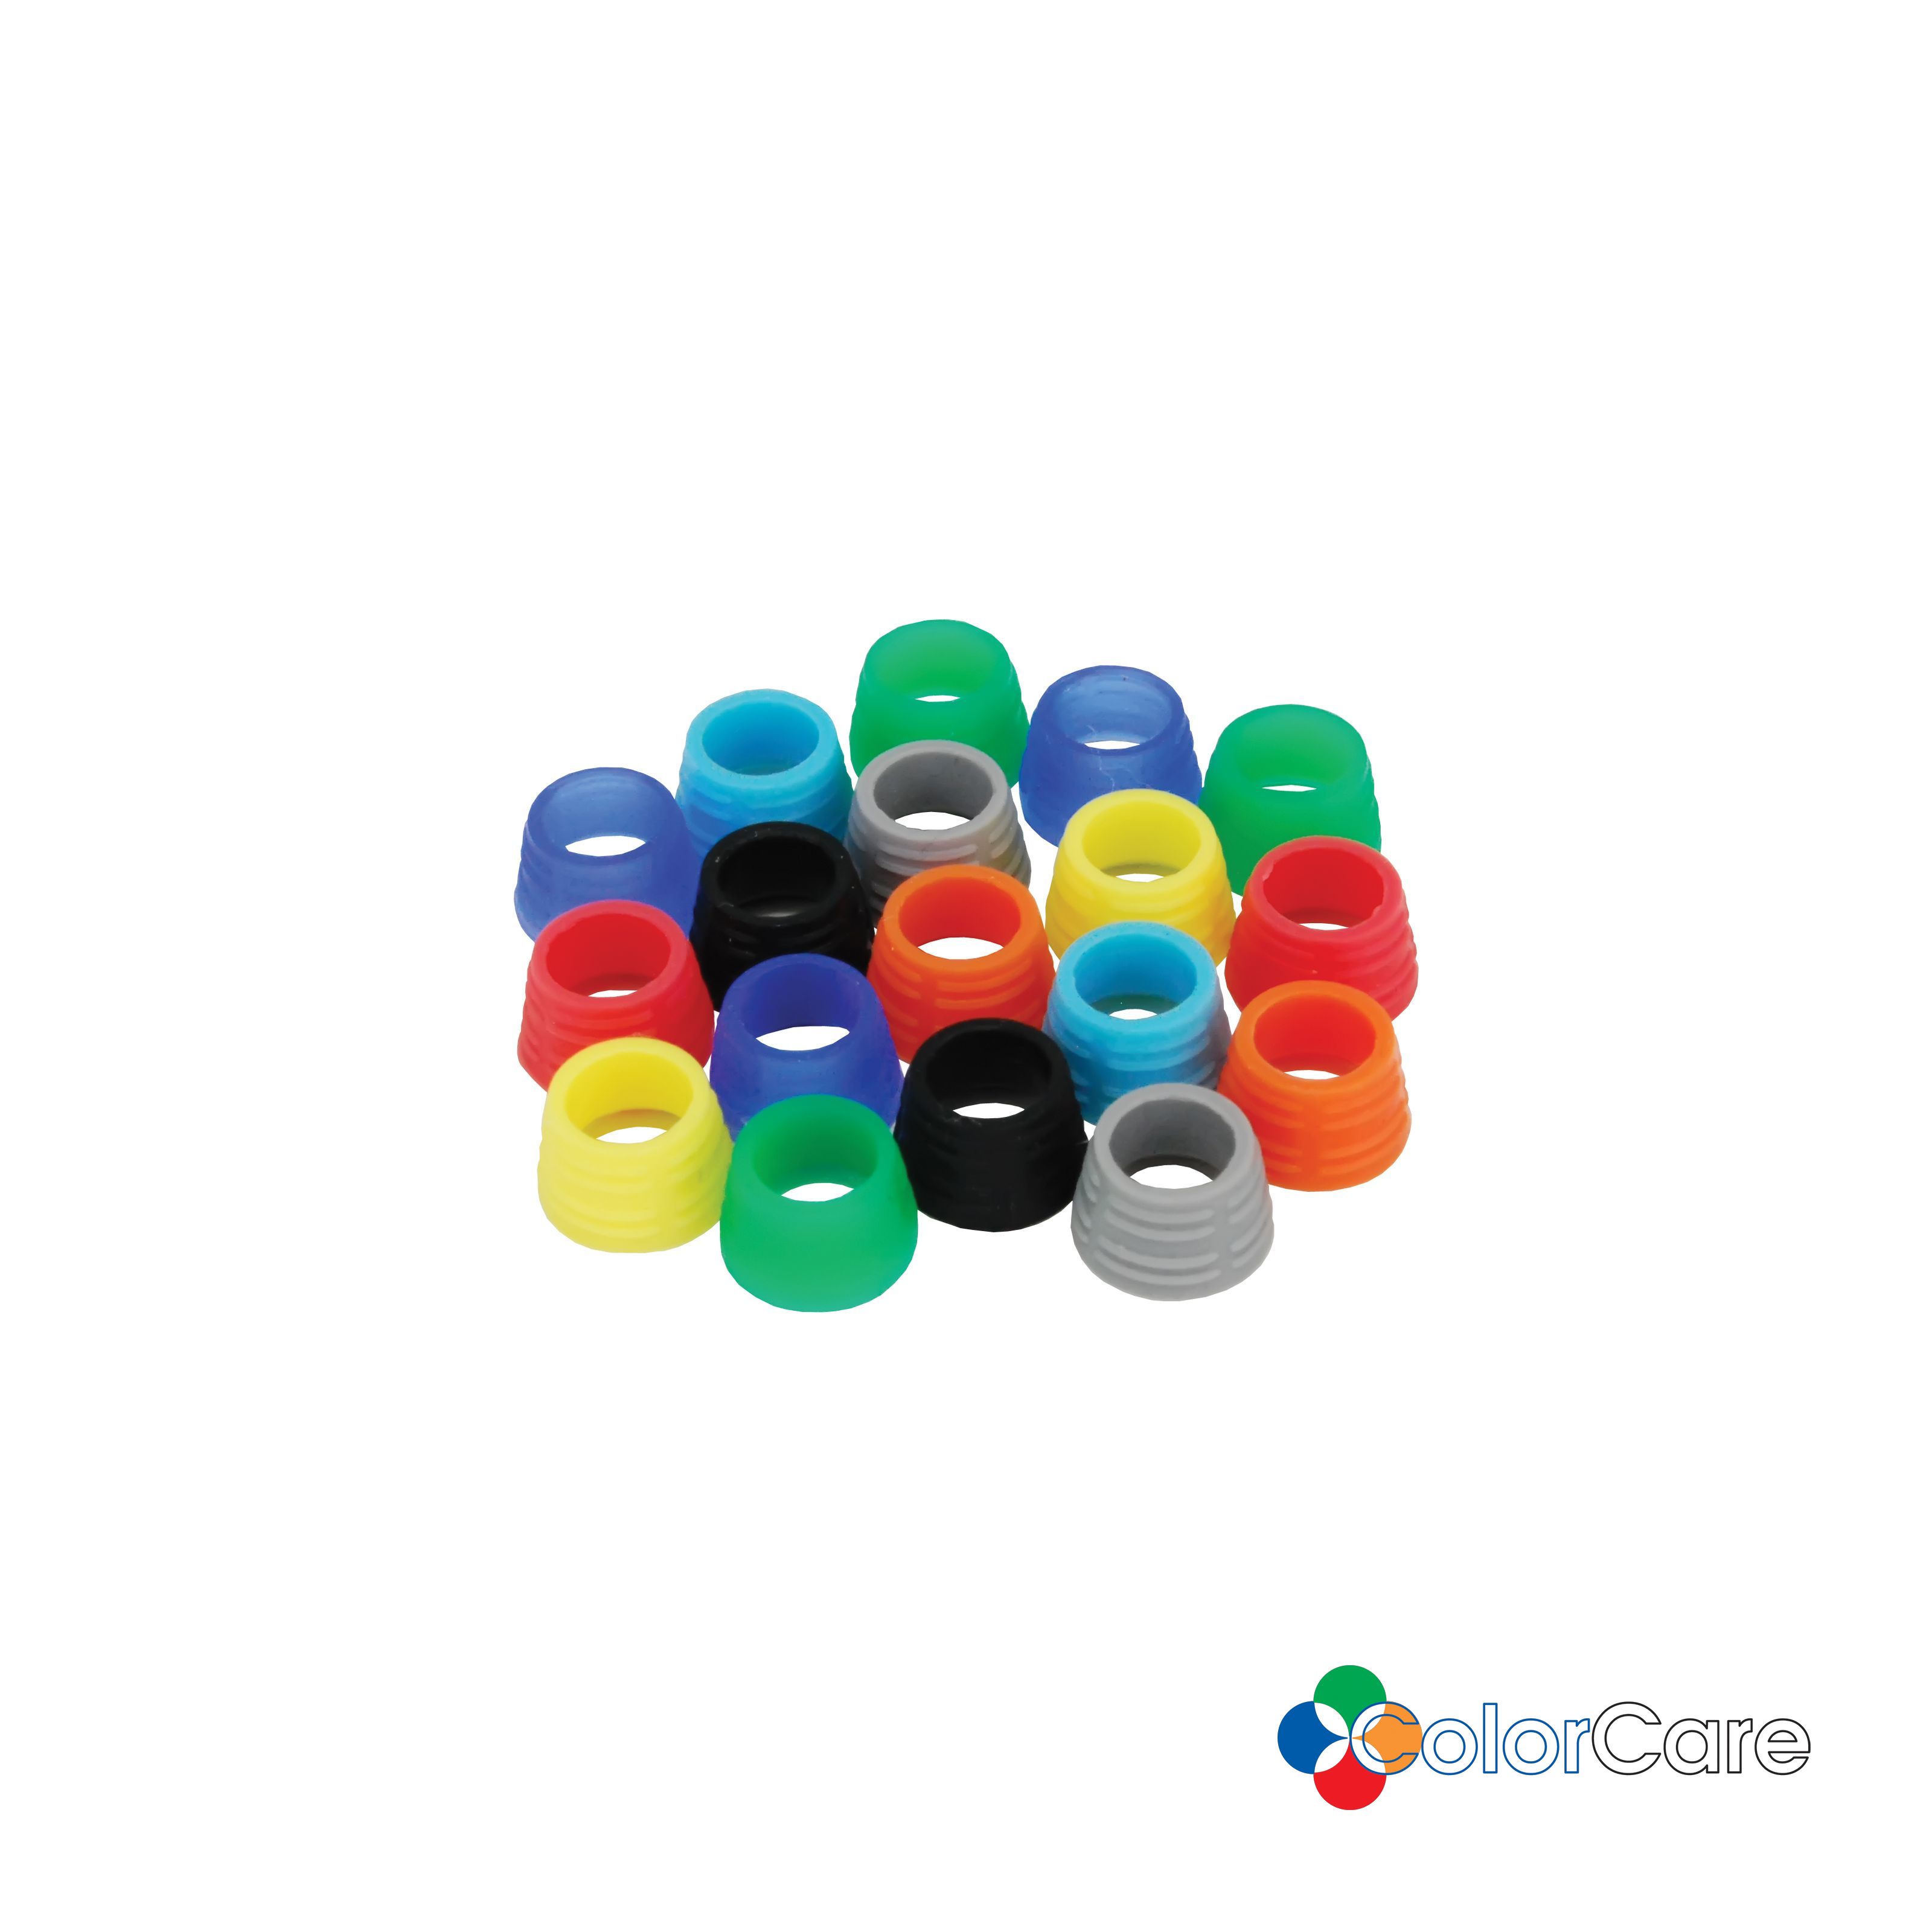 Color Rings for ColorCare Handle #7 - 16 pcs.